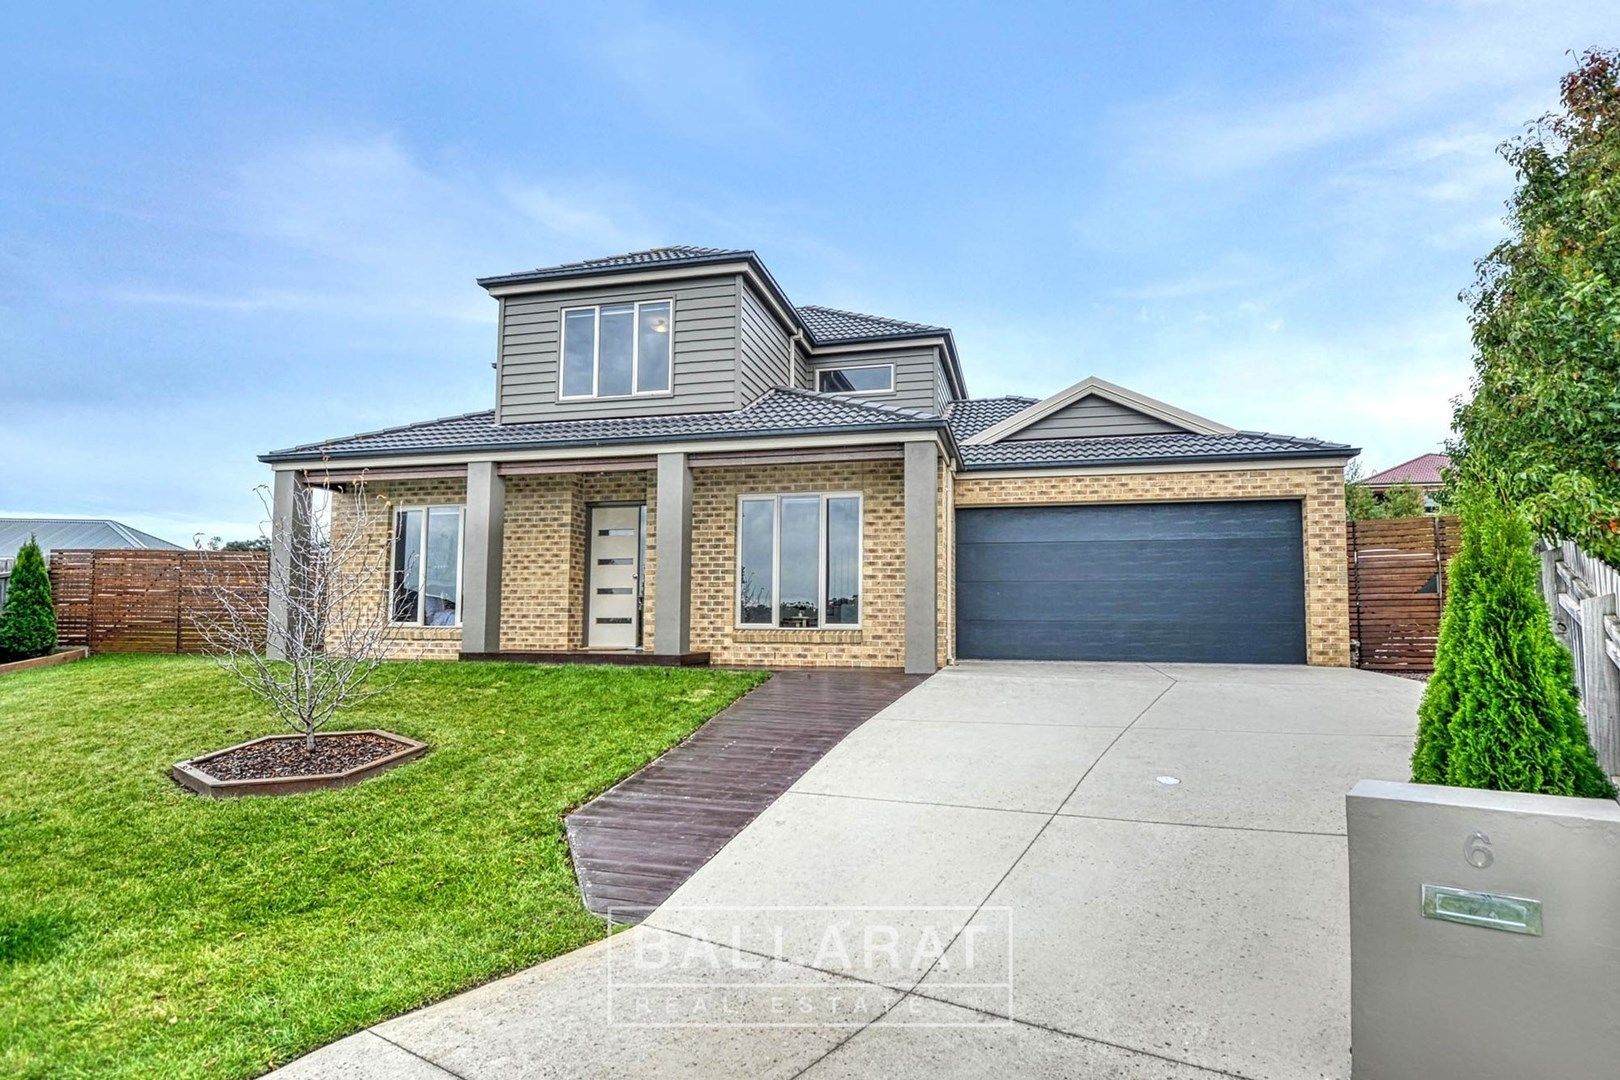 6 Griffiths Court, Buninyong VIC 3357, Image 0